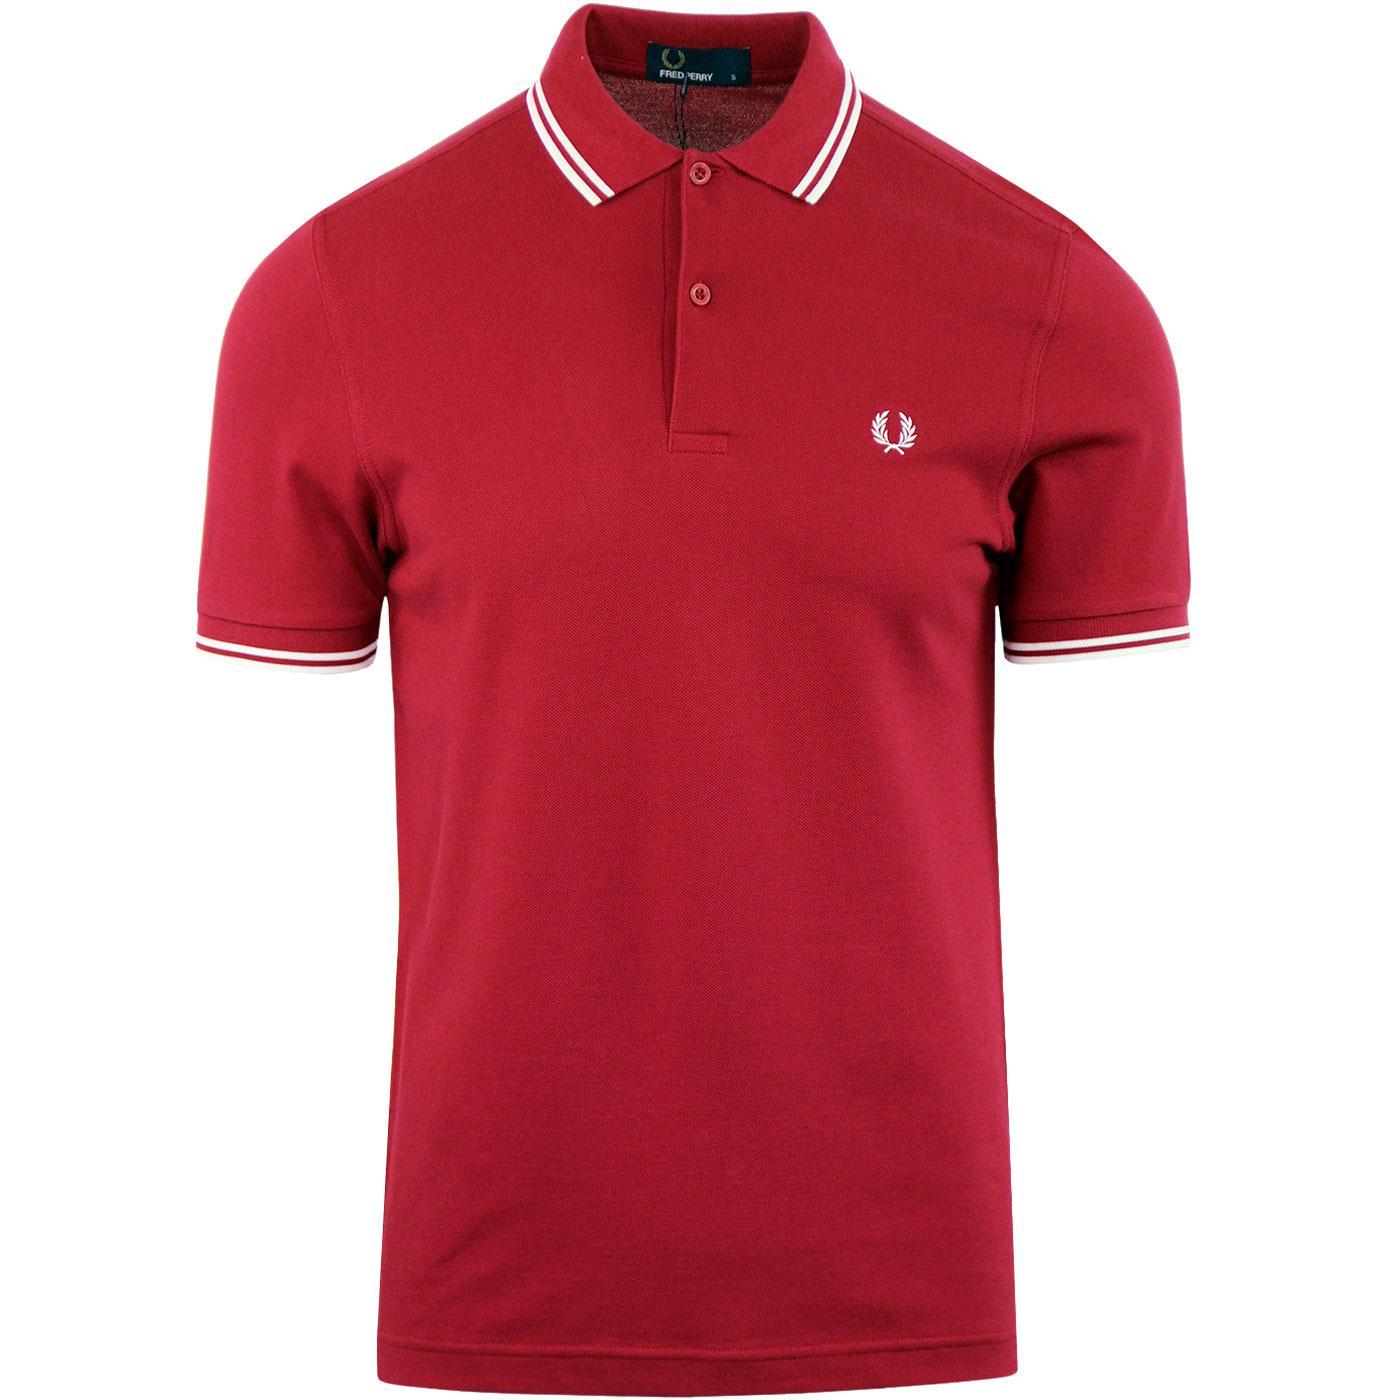 FRED PERRY M3600 Retro Mod Twin Tipped Polo Shirt Claret